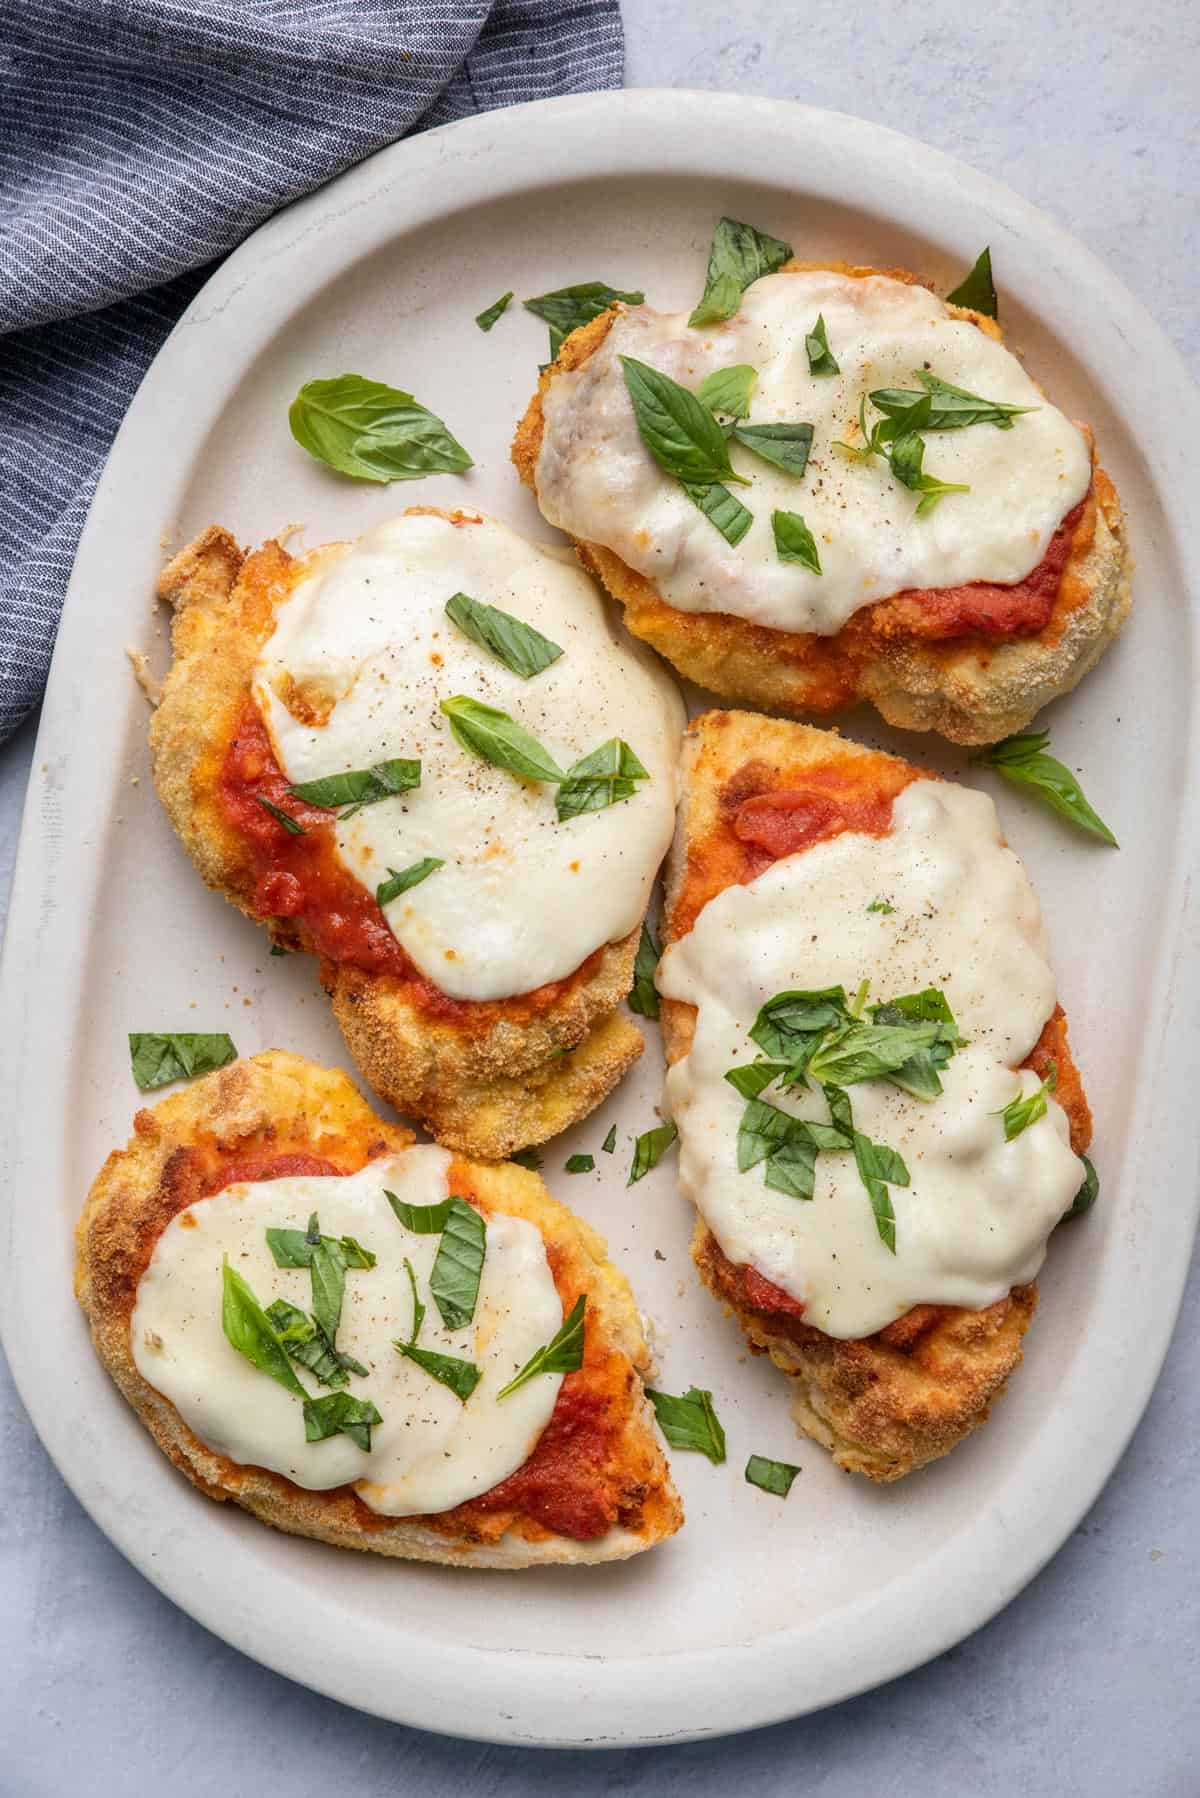 Chicken parmesan on a plate topped with melted mozzarella cheese and basil